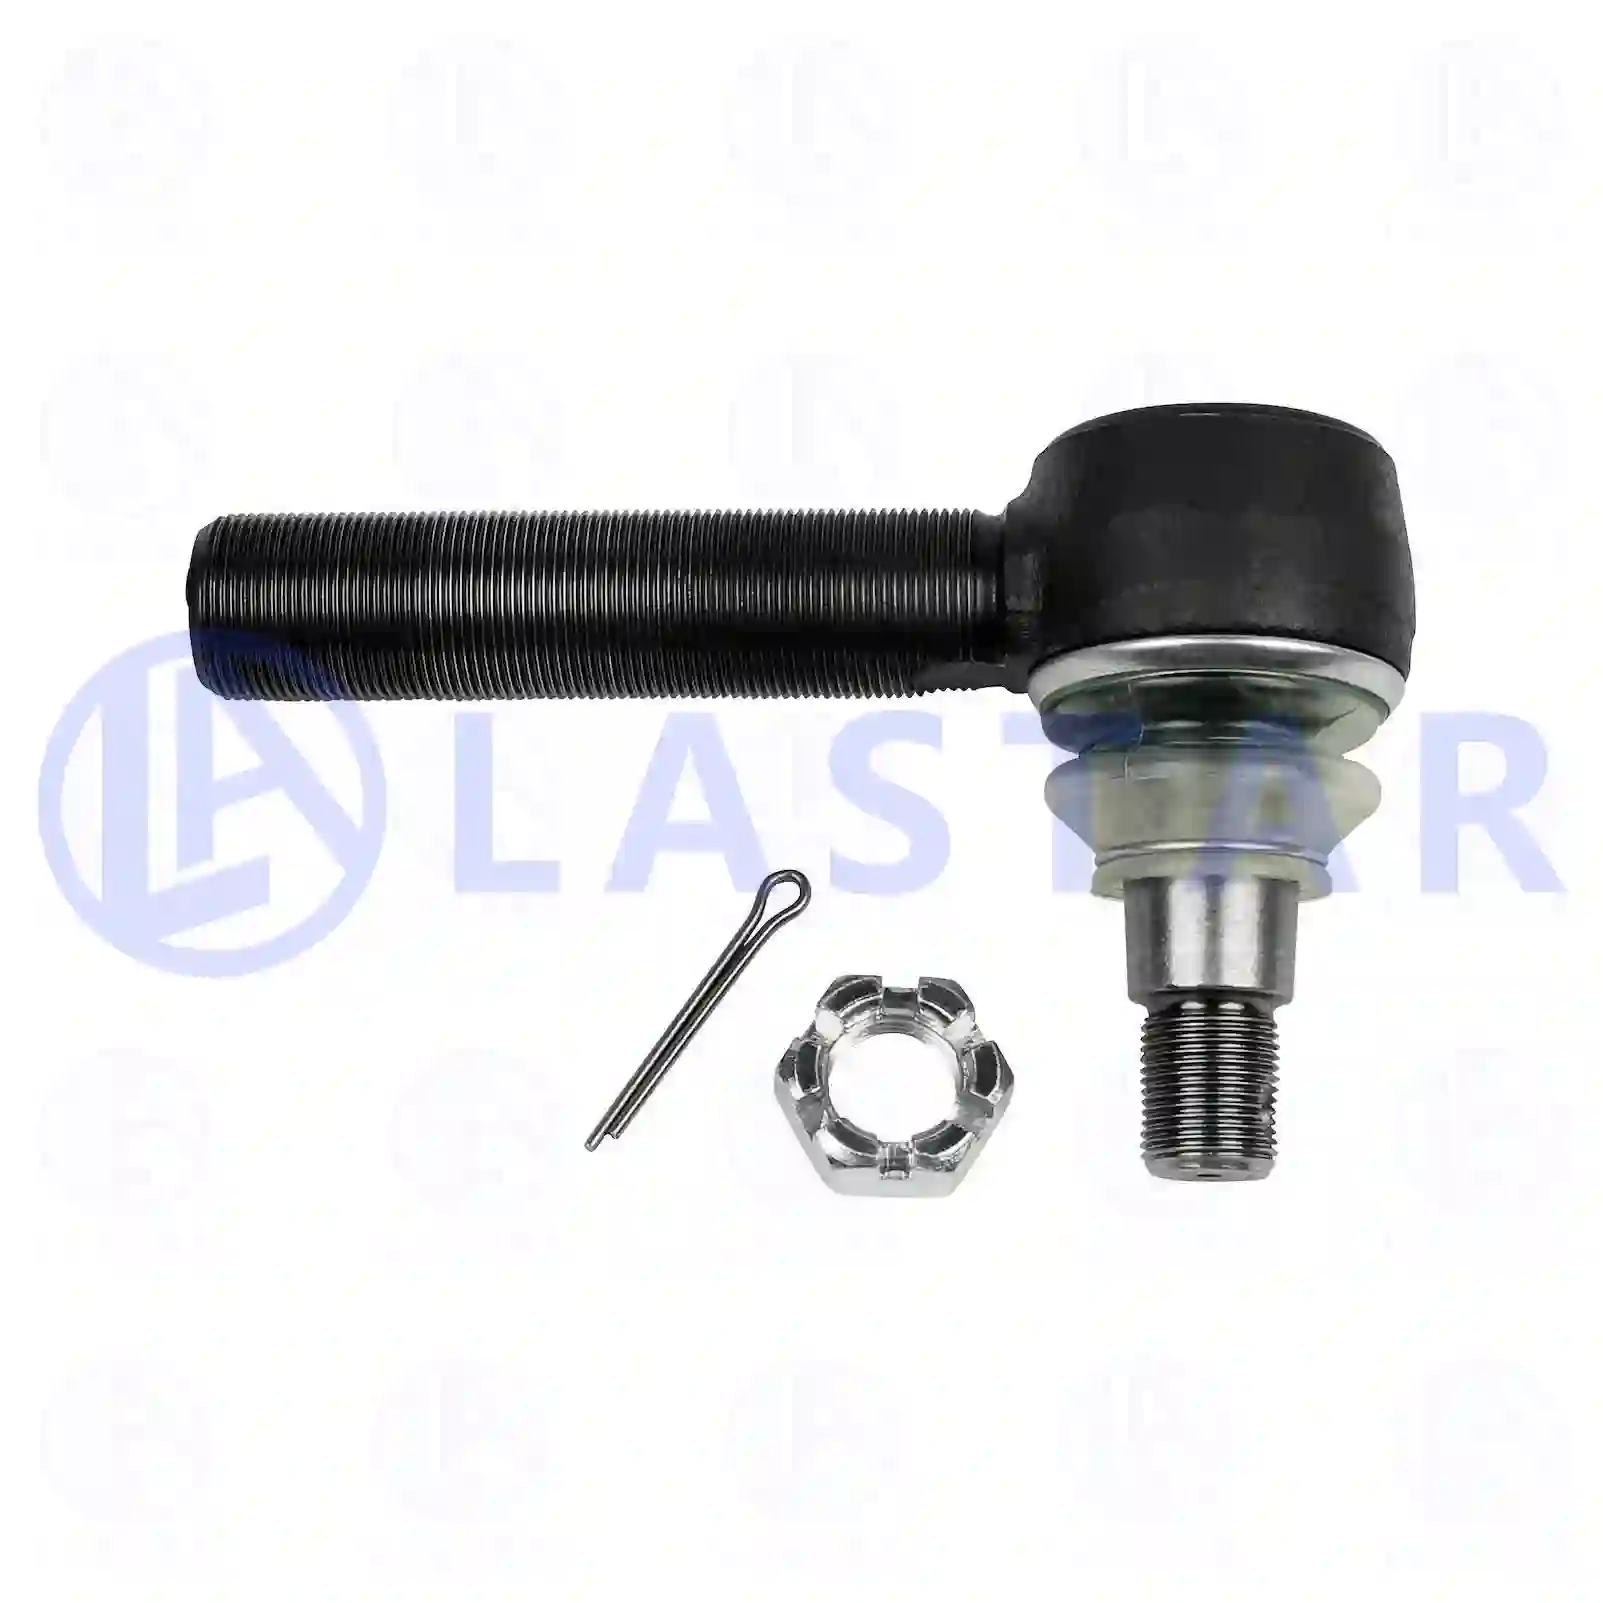 Ball joint, right hand thread, 77705615, 1604248, 1703472, 1705907, 1902997, ZG40398-0008 ||  77705615 Lastar Spare Part | Truck Spare Parts, Auotomotive Spare Parts Ball joint, right hand thread, 77705615, 1604248, 1703472, 1705907, 1902997, ZG40398-0008 ||  77705615 Lastar Spare Part | Truck Spare Parts, Auotomotive Spare Parts